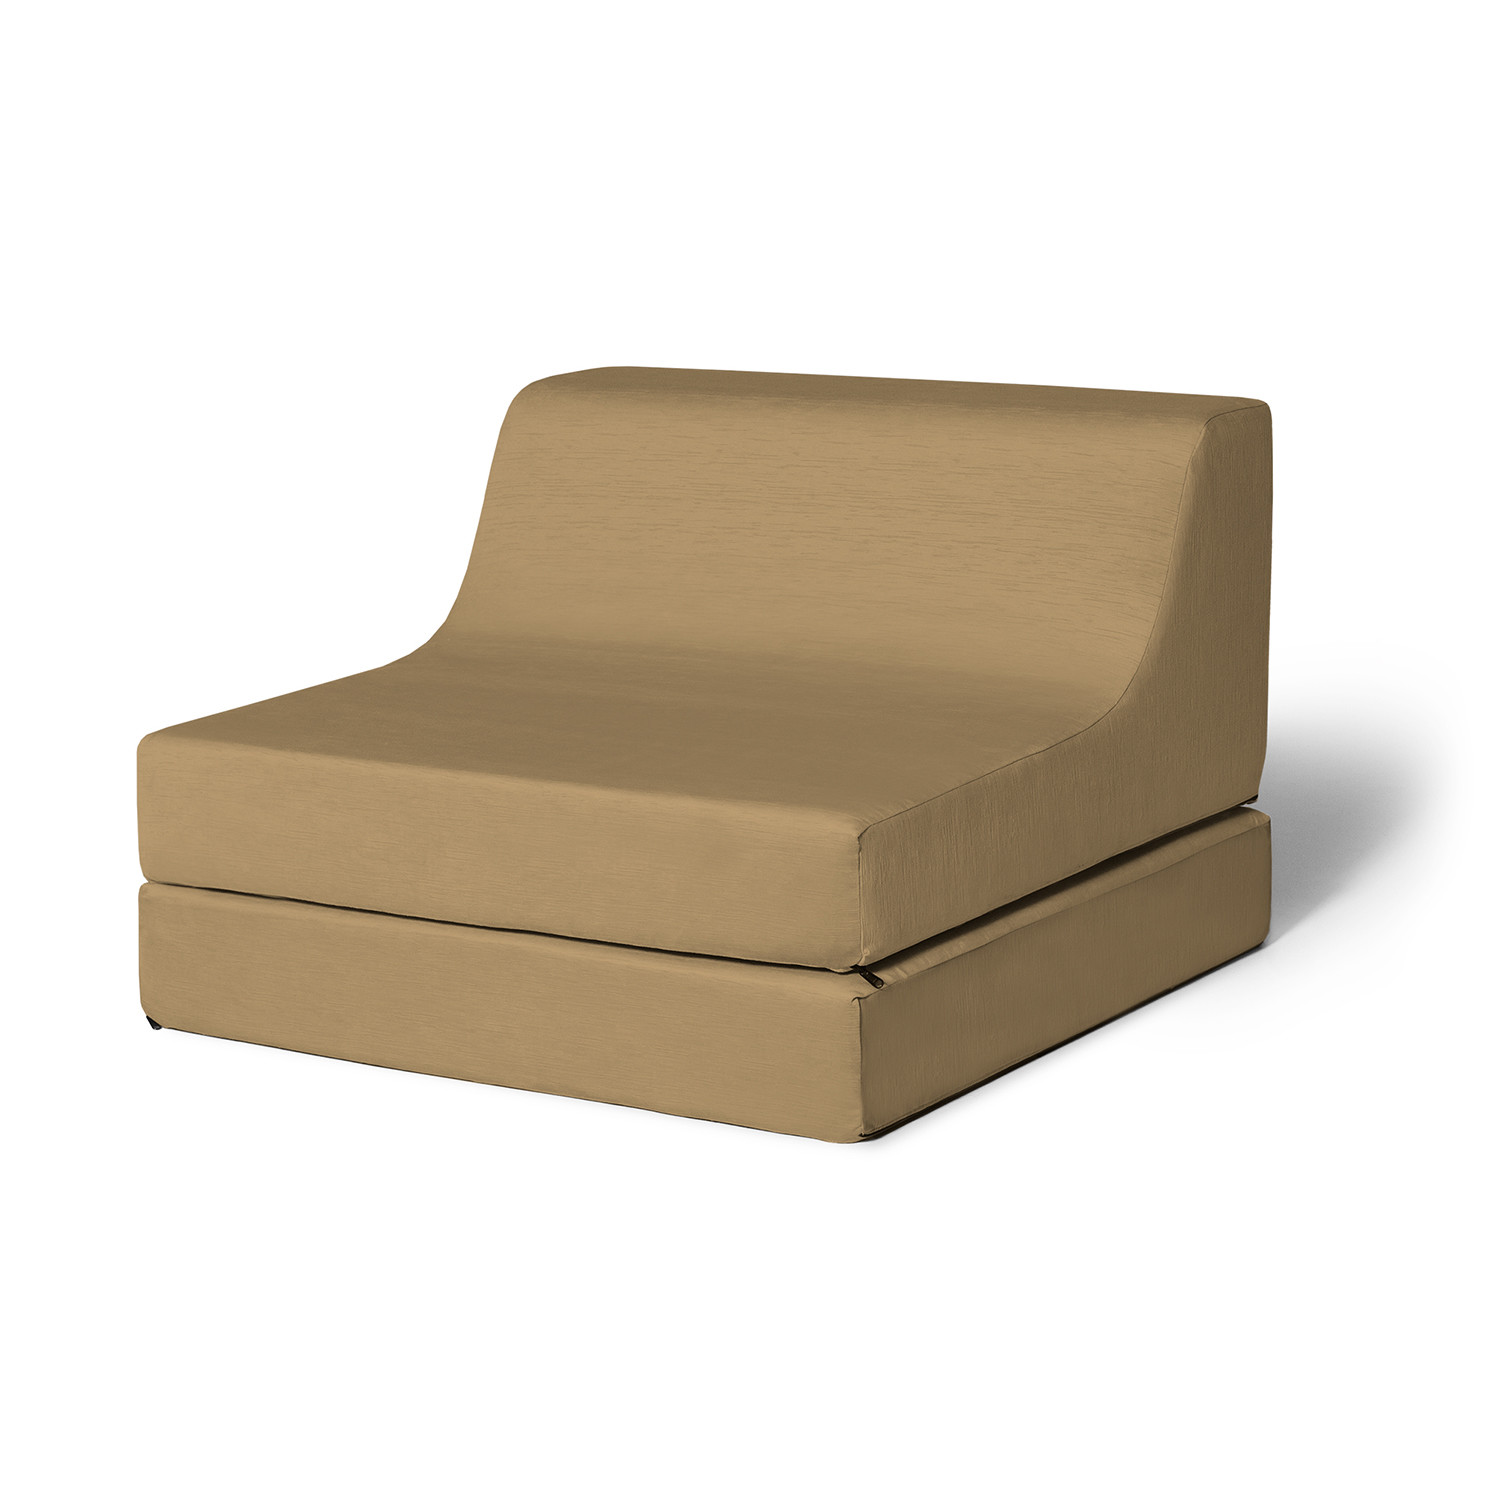 Modular Lounge Chair (Ivory) - Jaxx Casual Living - Touch of Modern